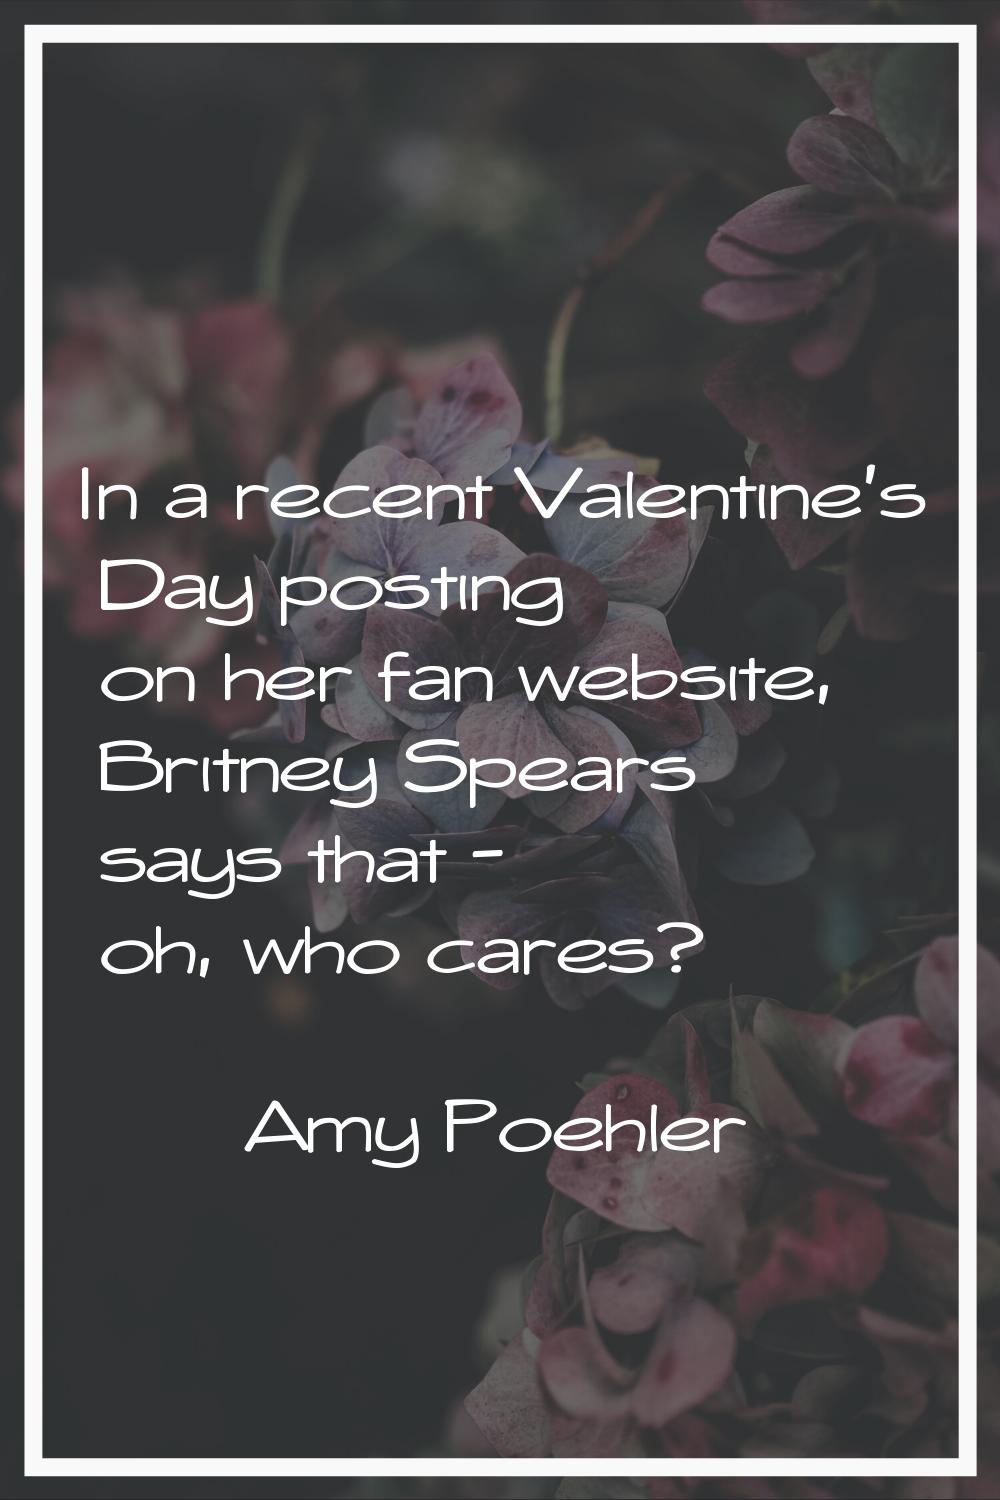 In a recent Valentine's Day posting on her fan website, Britney Spears says that - oh, who cares?